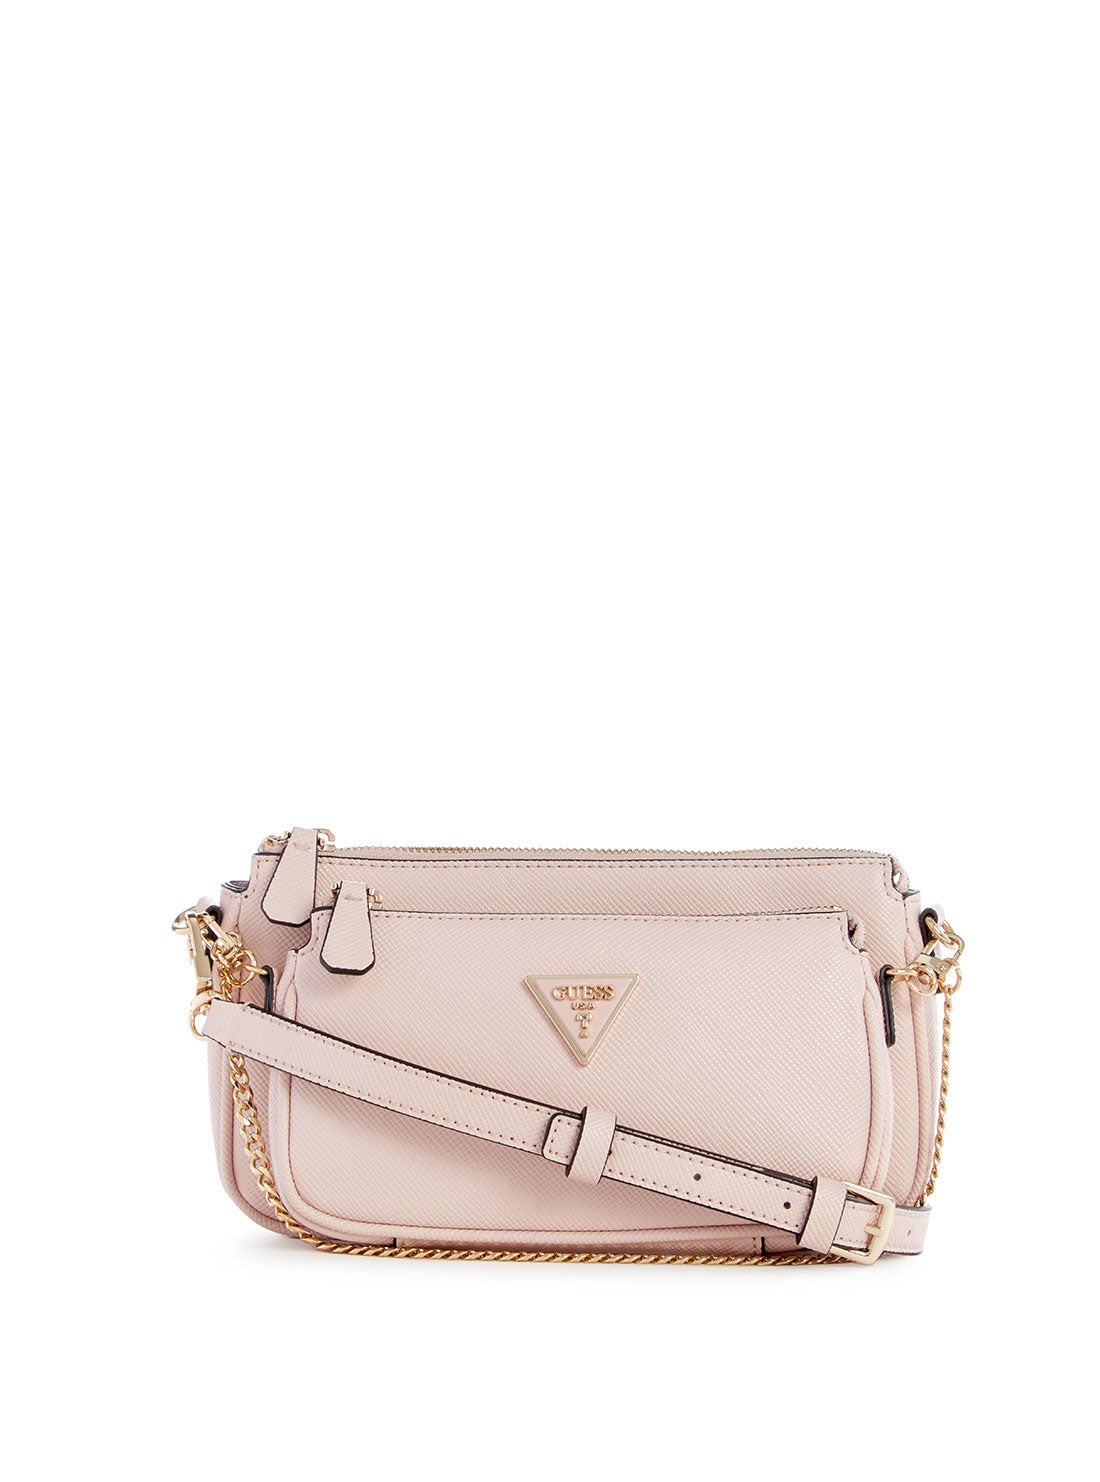 GUESS Pink Noelle Pouch Crossbody Bag front view